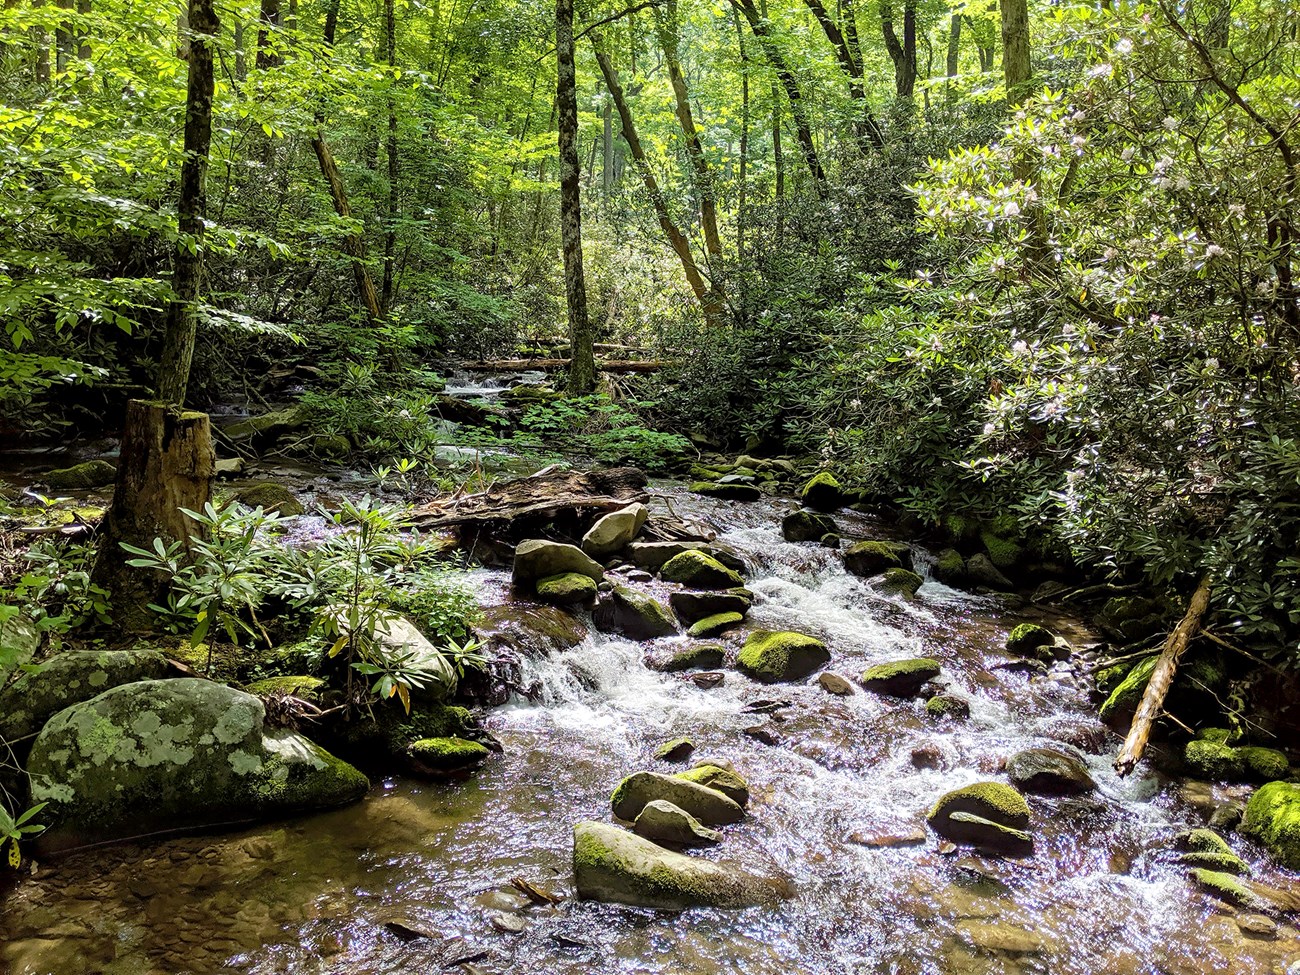 Stream running over rocks in a lush green forest